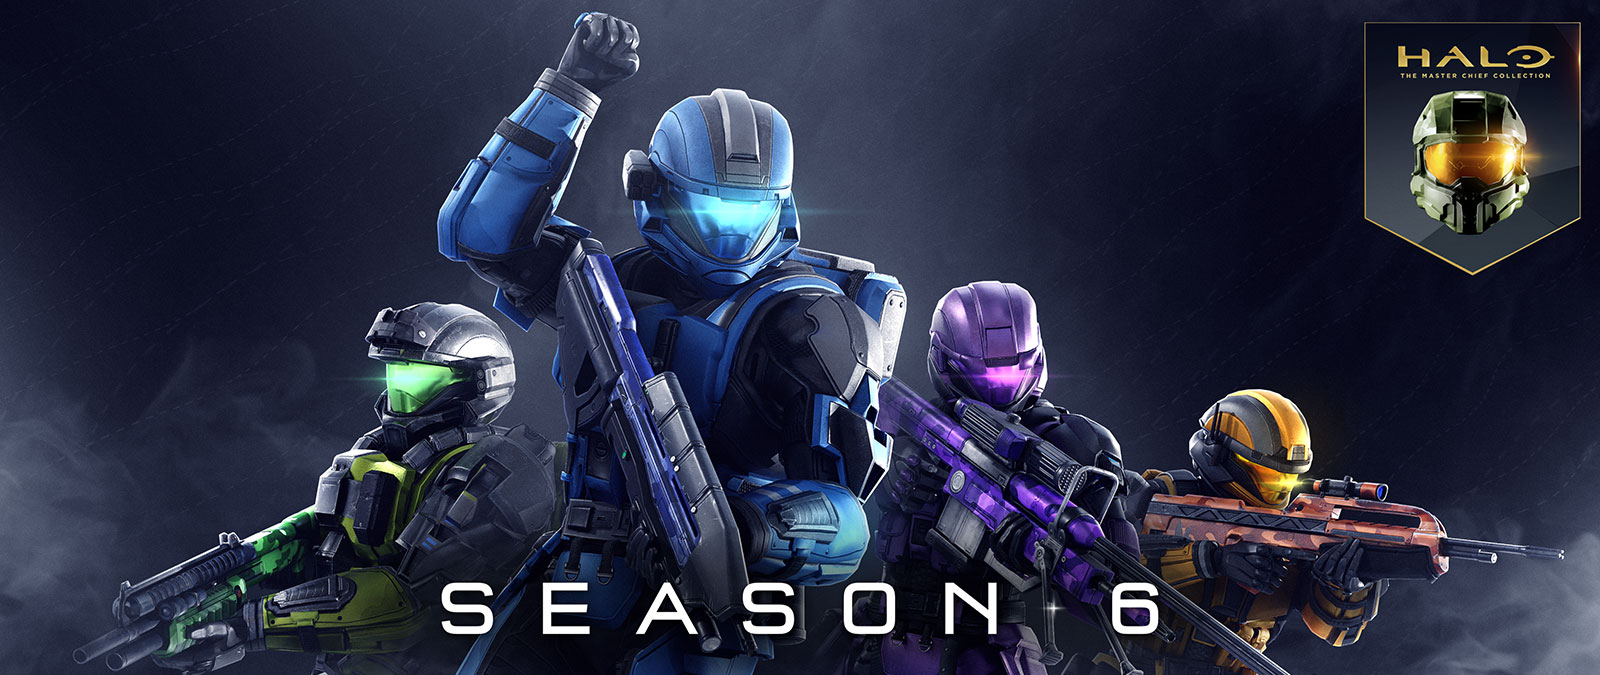 Halo: The Master Chief Collection, Season 6, Spartans in colourful armour pose with guns